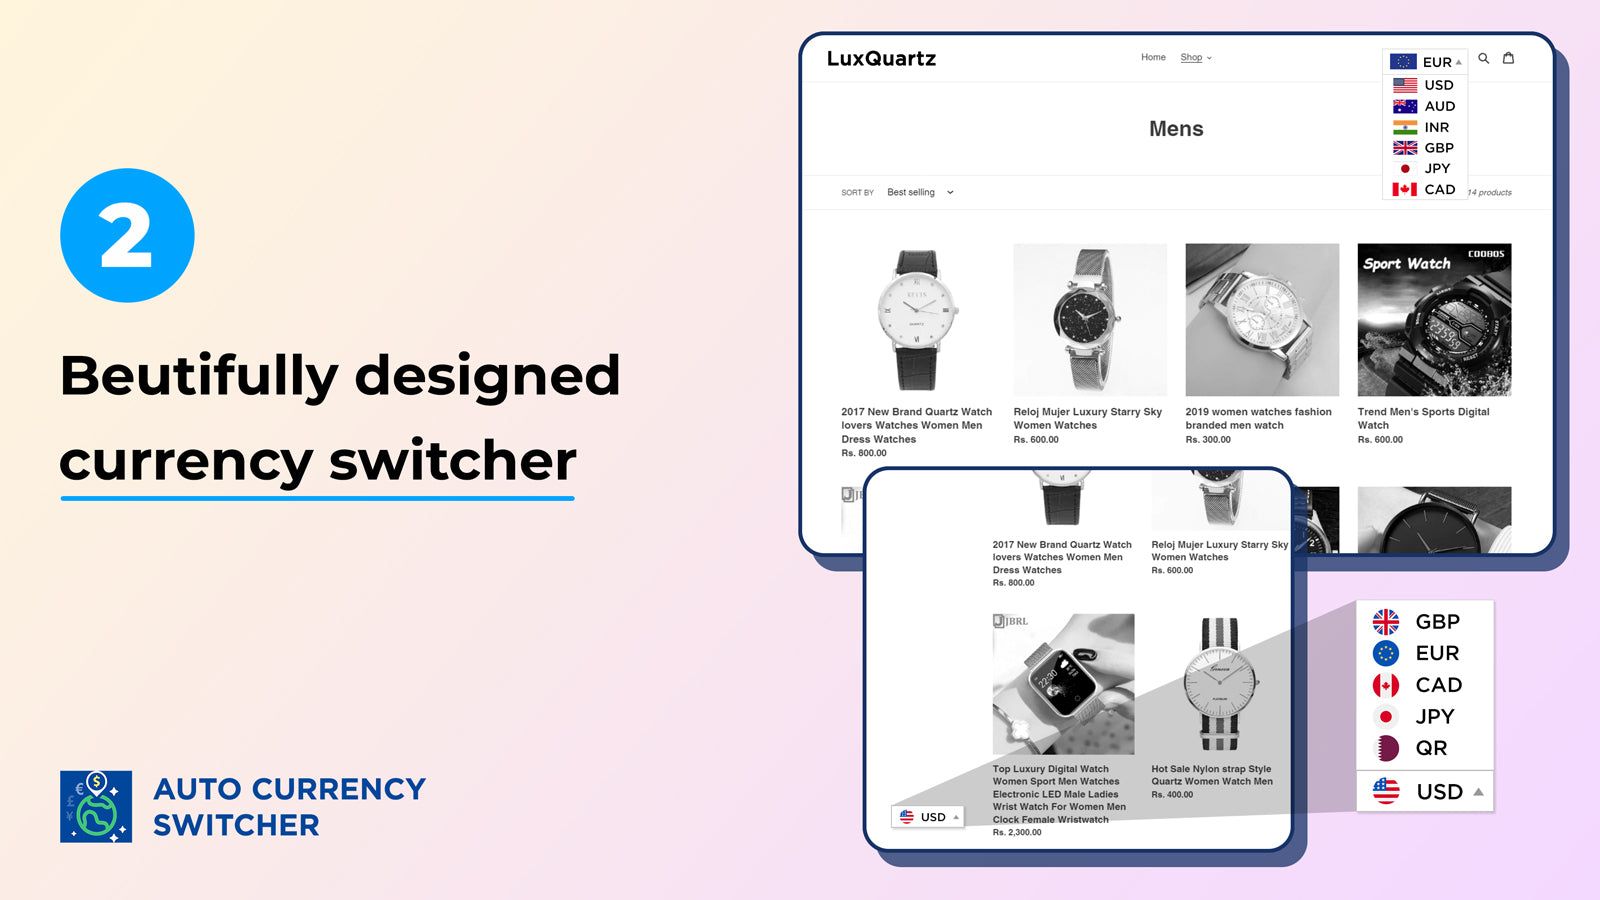 Beautifully designed currency switcher